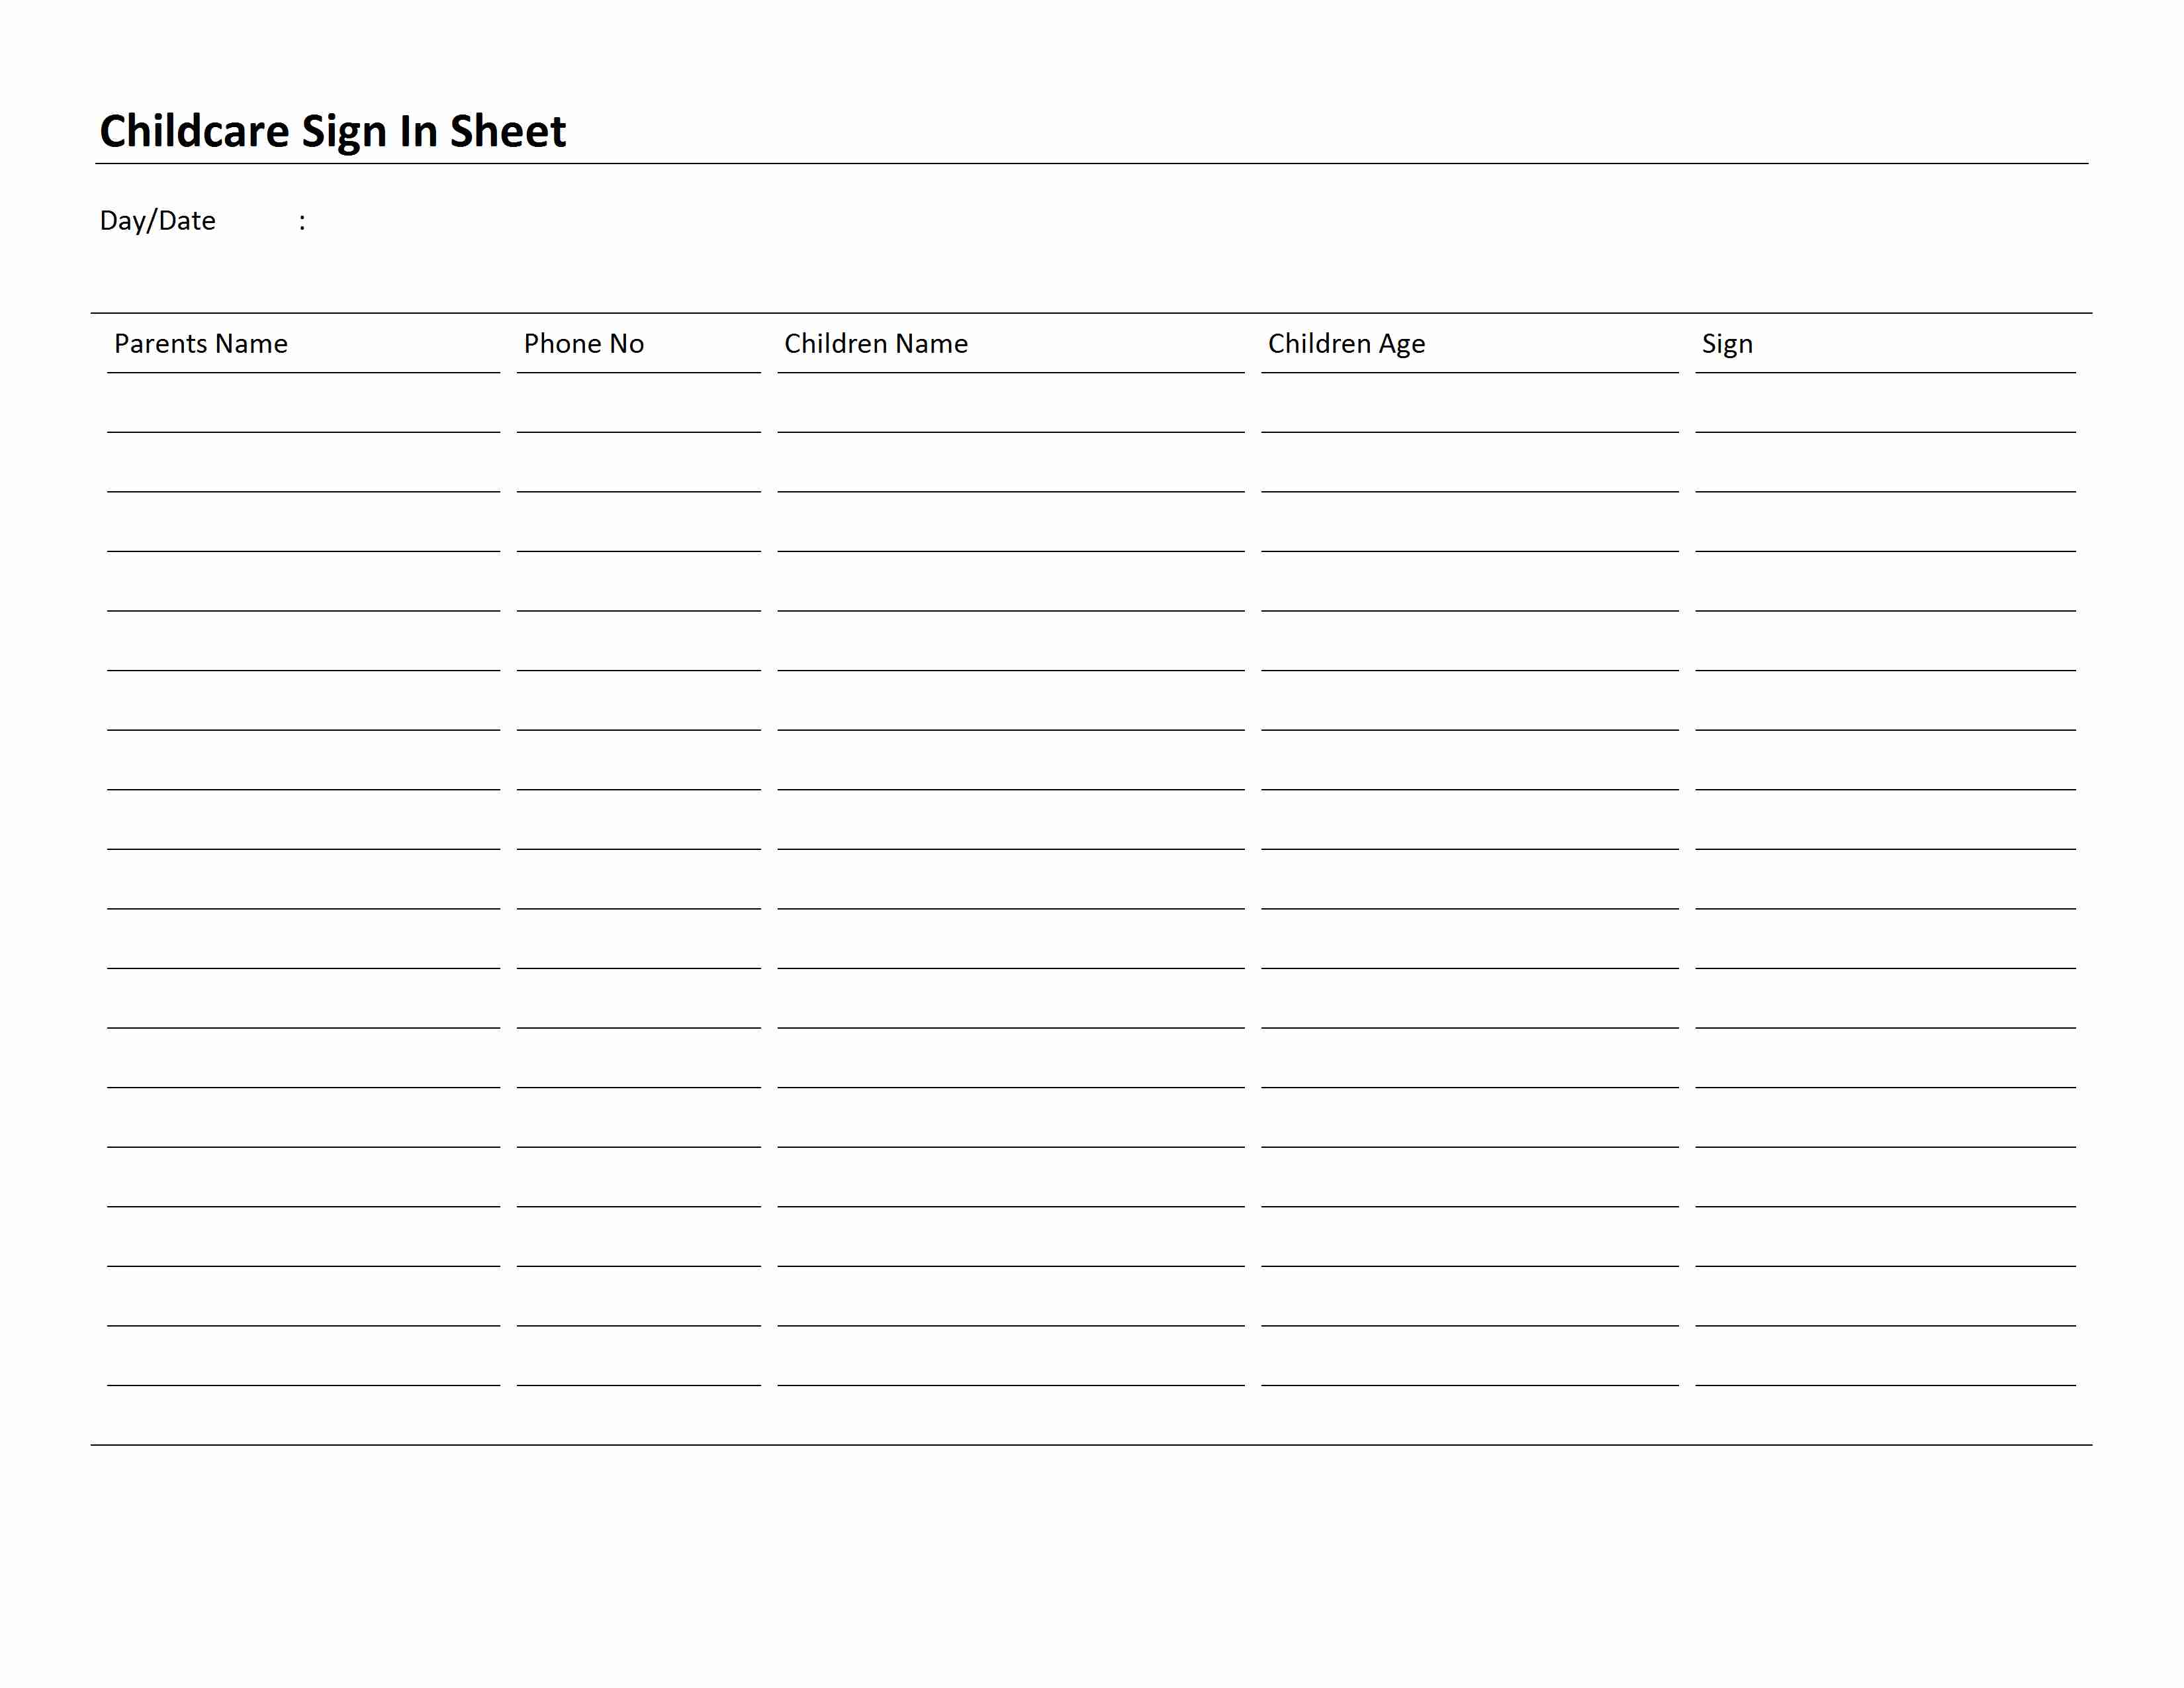 Childcare Sign In Sheet Template for Word